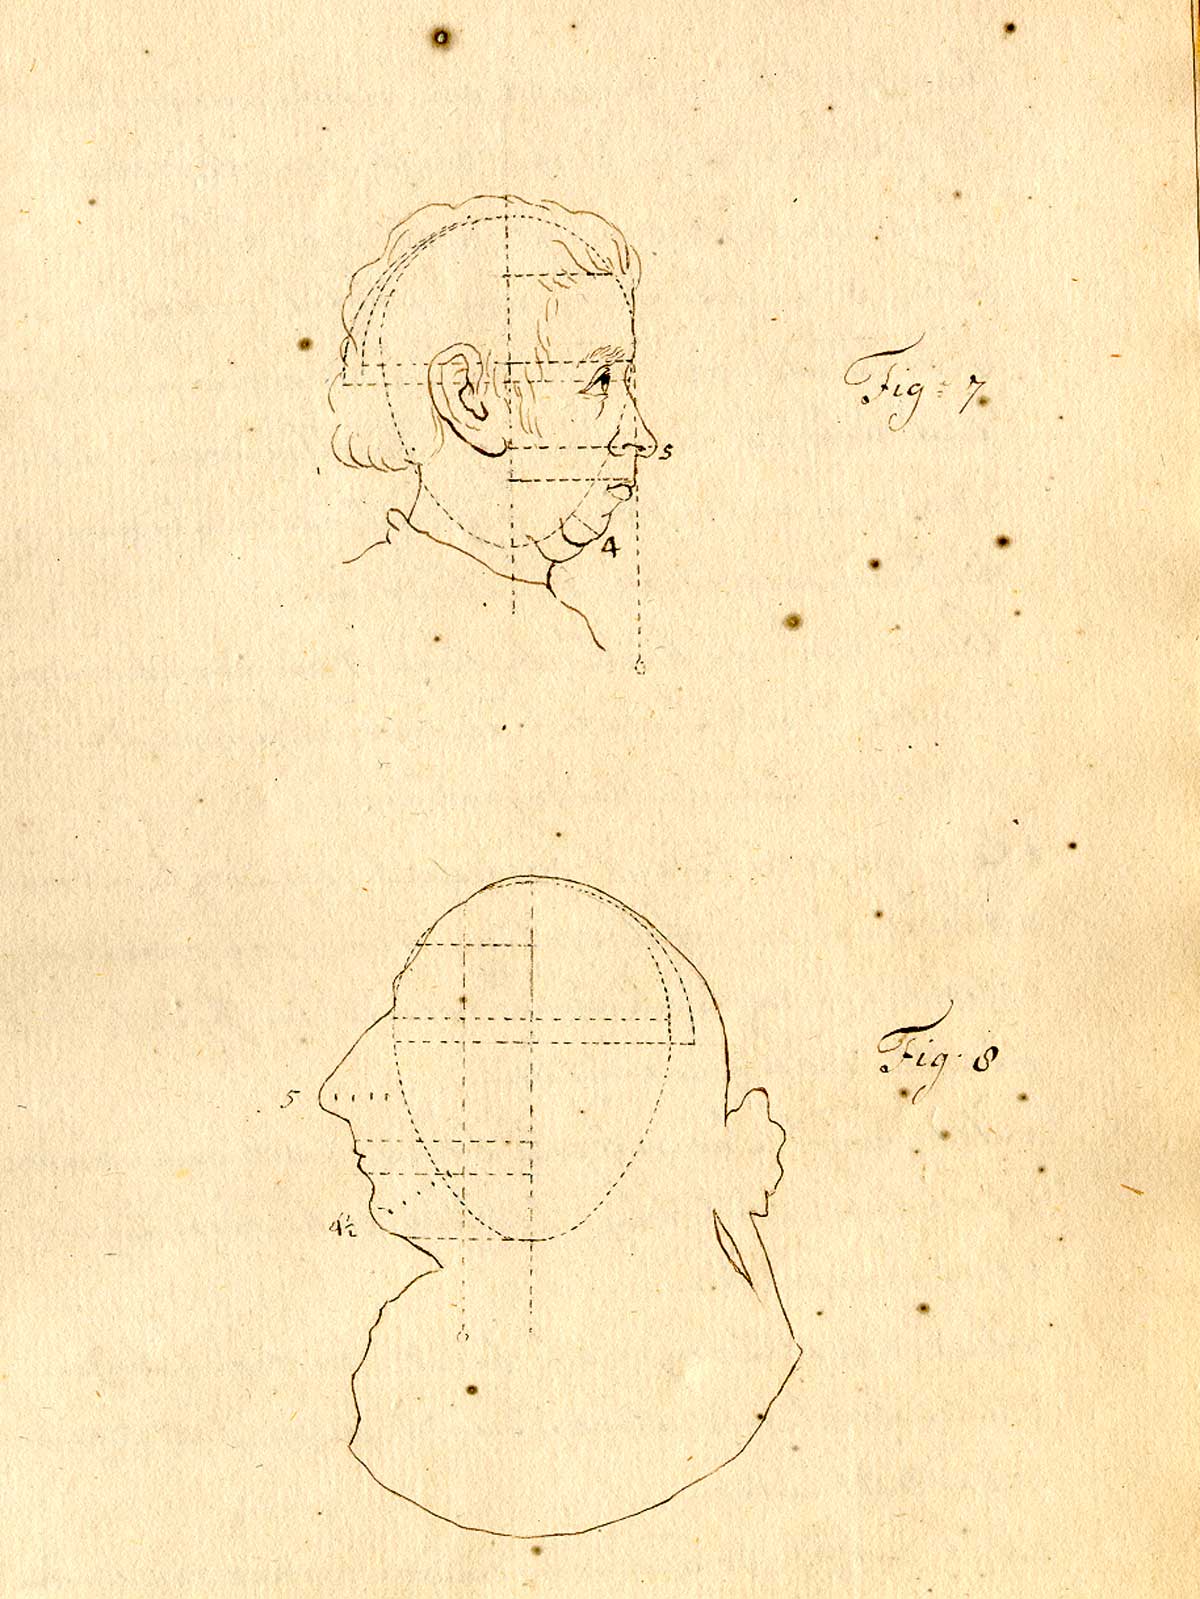 Manuscript drawings of two male heads in profile one facing the left and the other to the right, each with indexed lines showing proportional measurements and shapes of the head, from Anonymous treatise on physiognomy, NLM call no.: MS B 662.